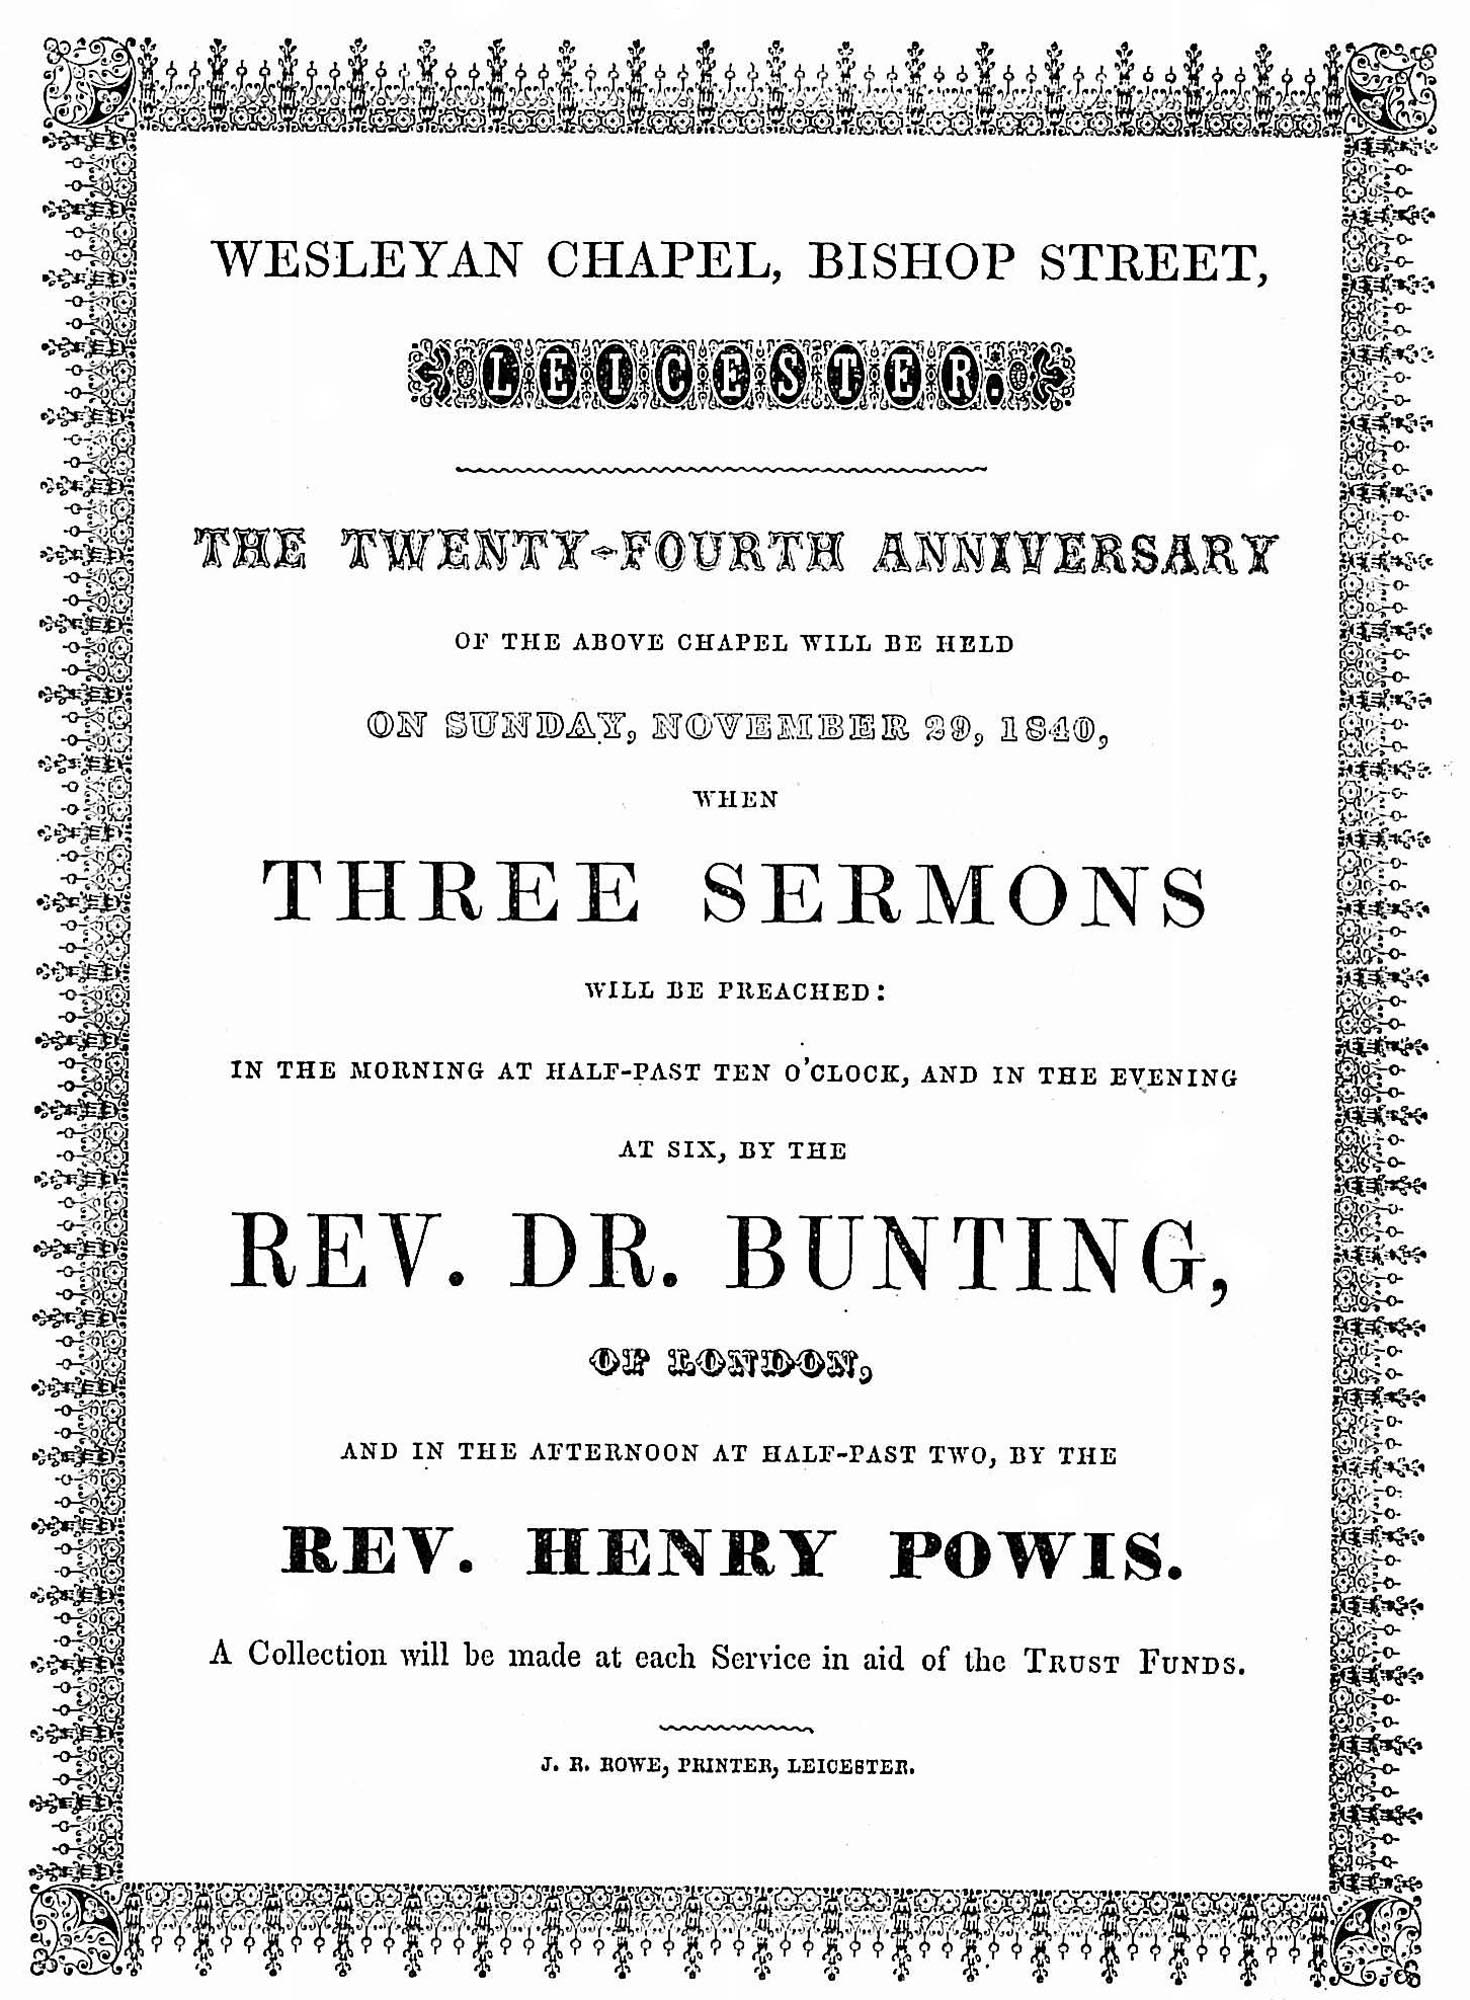 A poster for the chapel's 24th anniversary sermons, 1840 - 